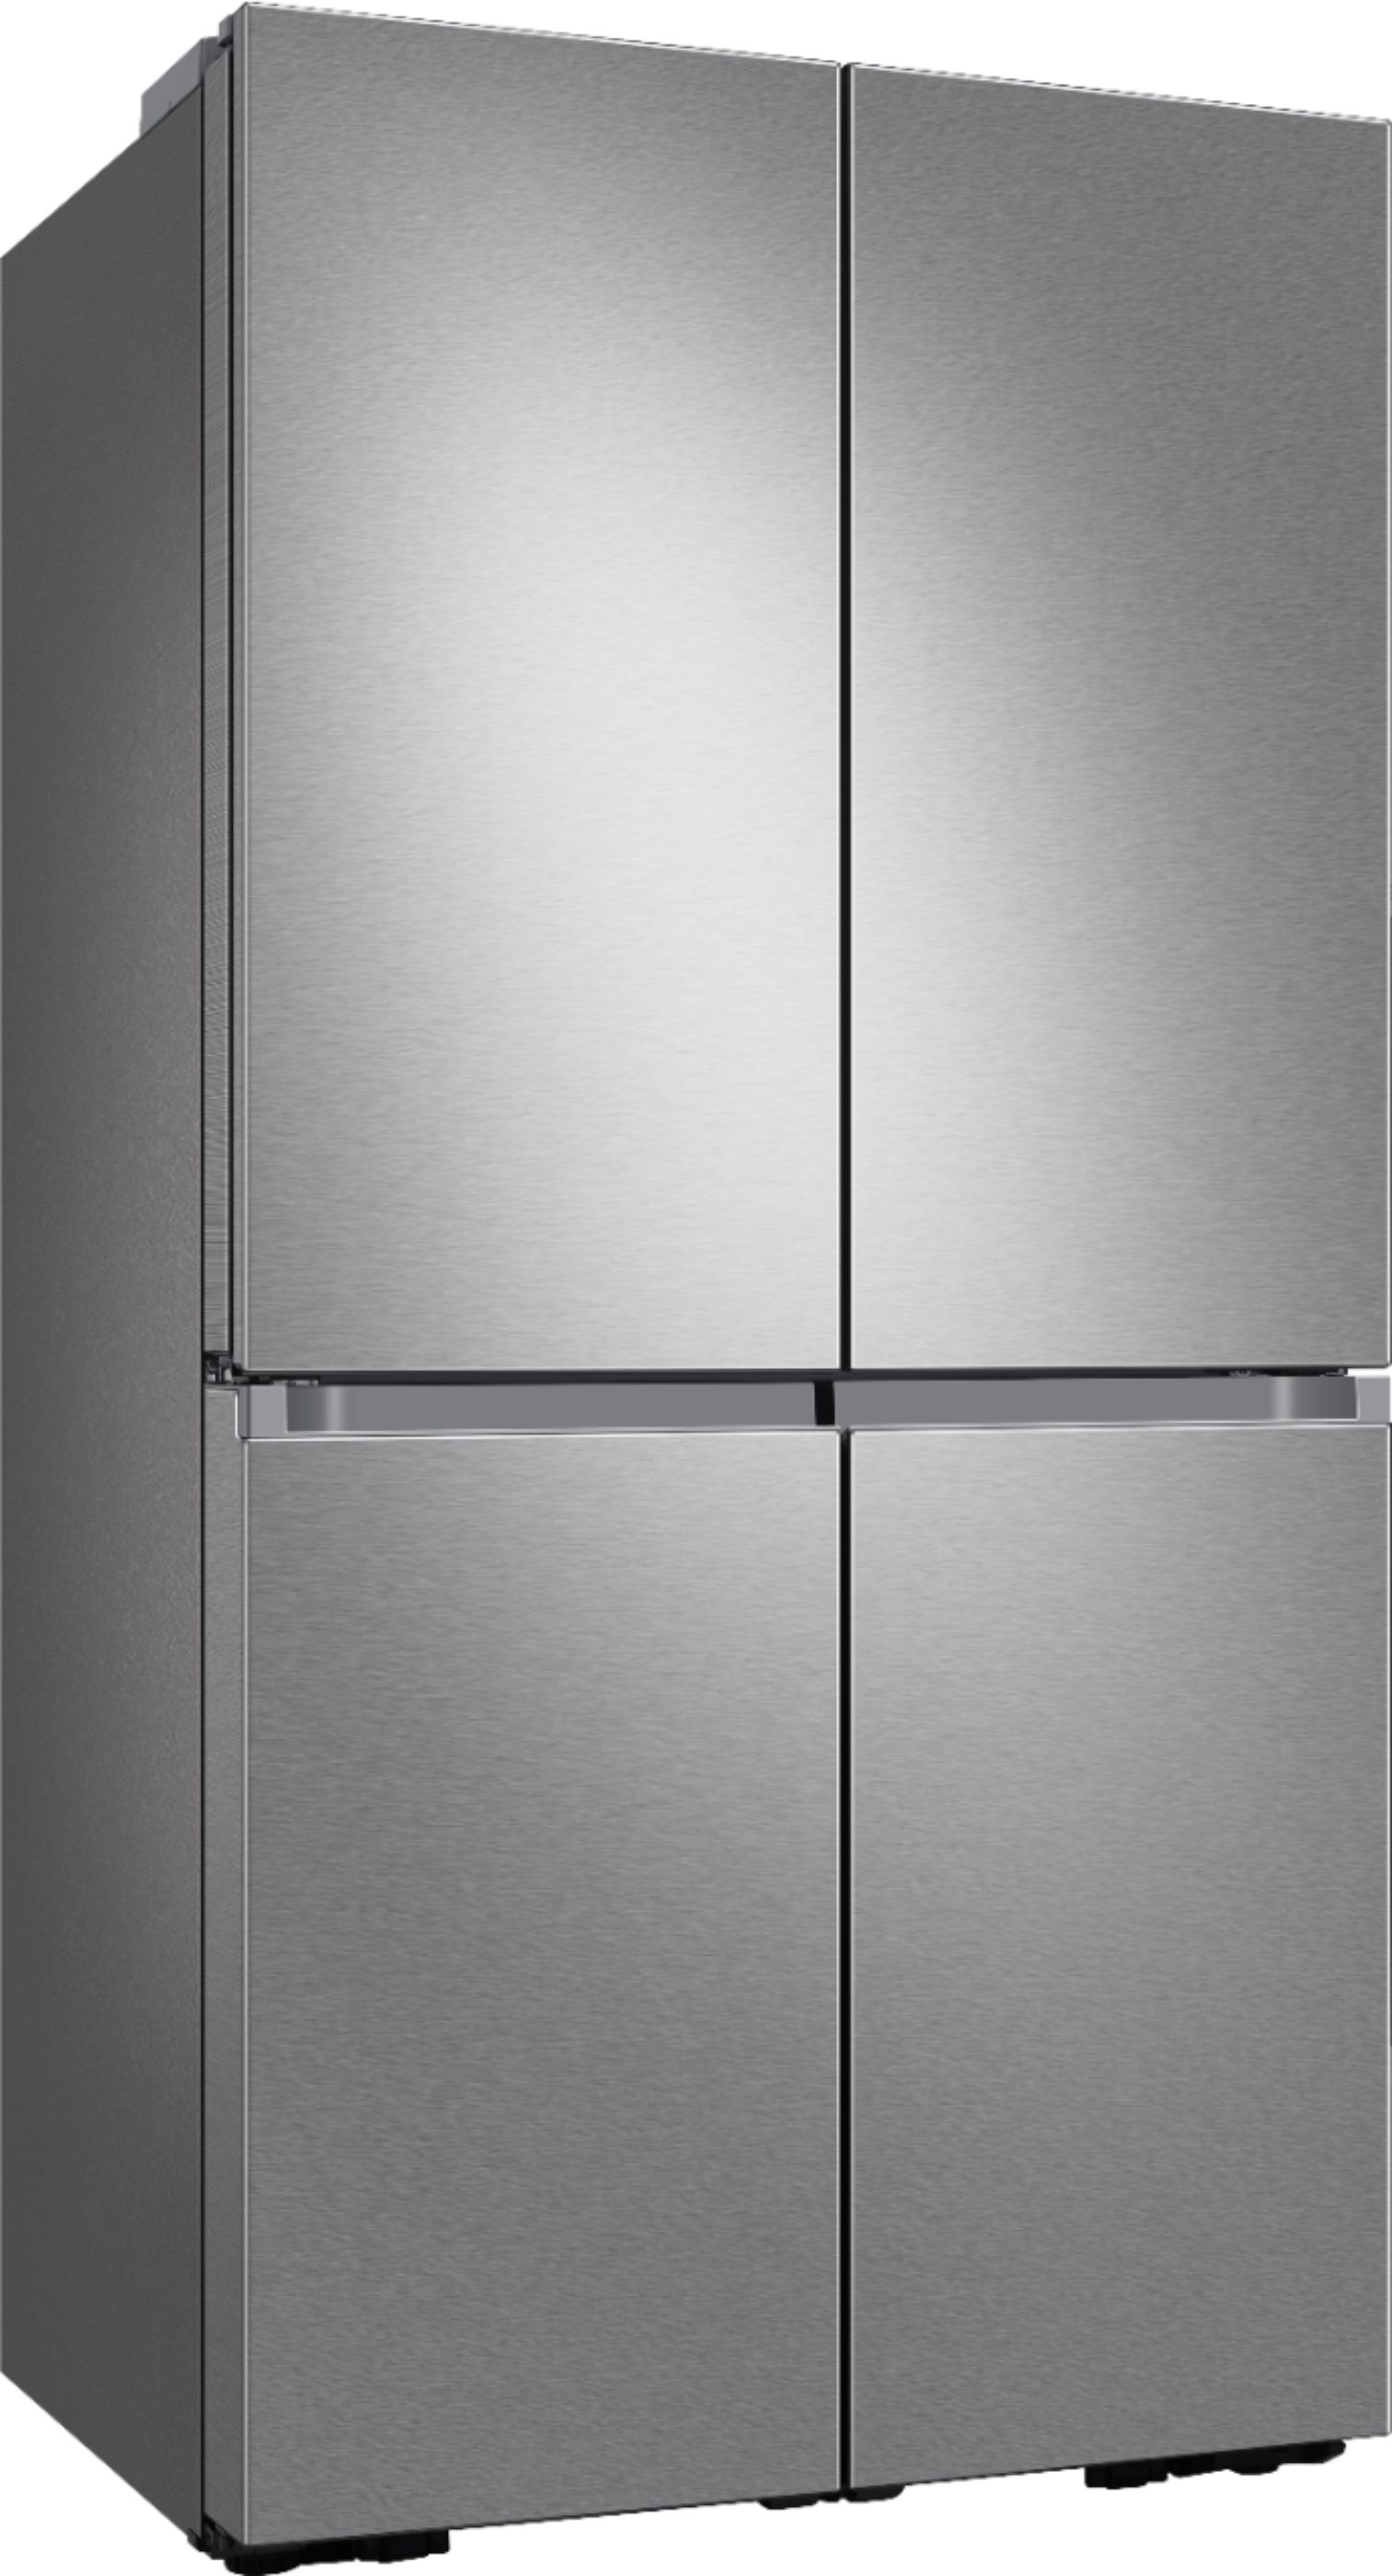 Left View: Samsung - 23 cu. ft. 4-Door Flex™ French Door Counter-Depth Refrigerator with WiFi, AutoFill Water Pitcher & Dual Ice Maker - Black stainless steel